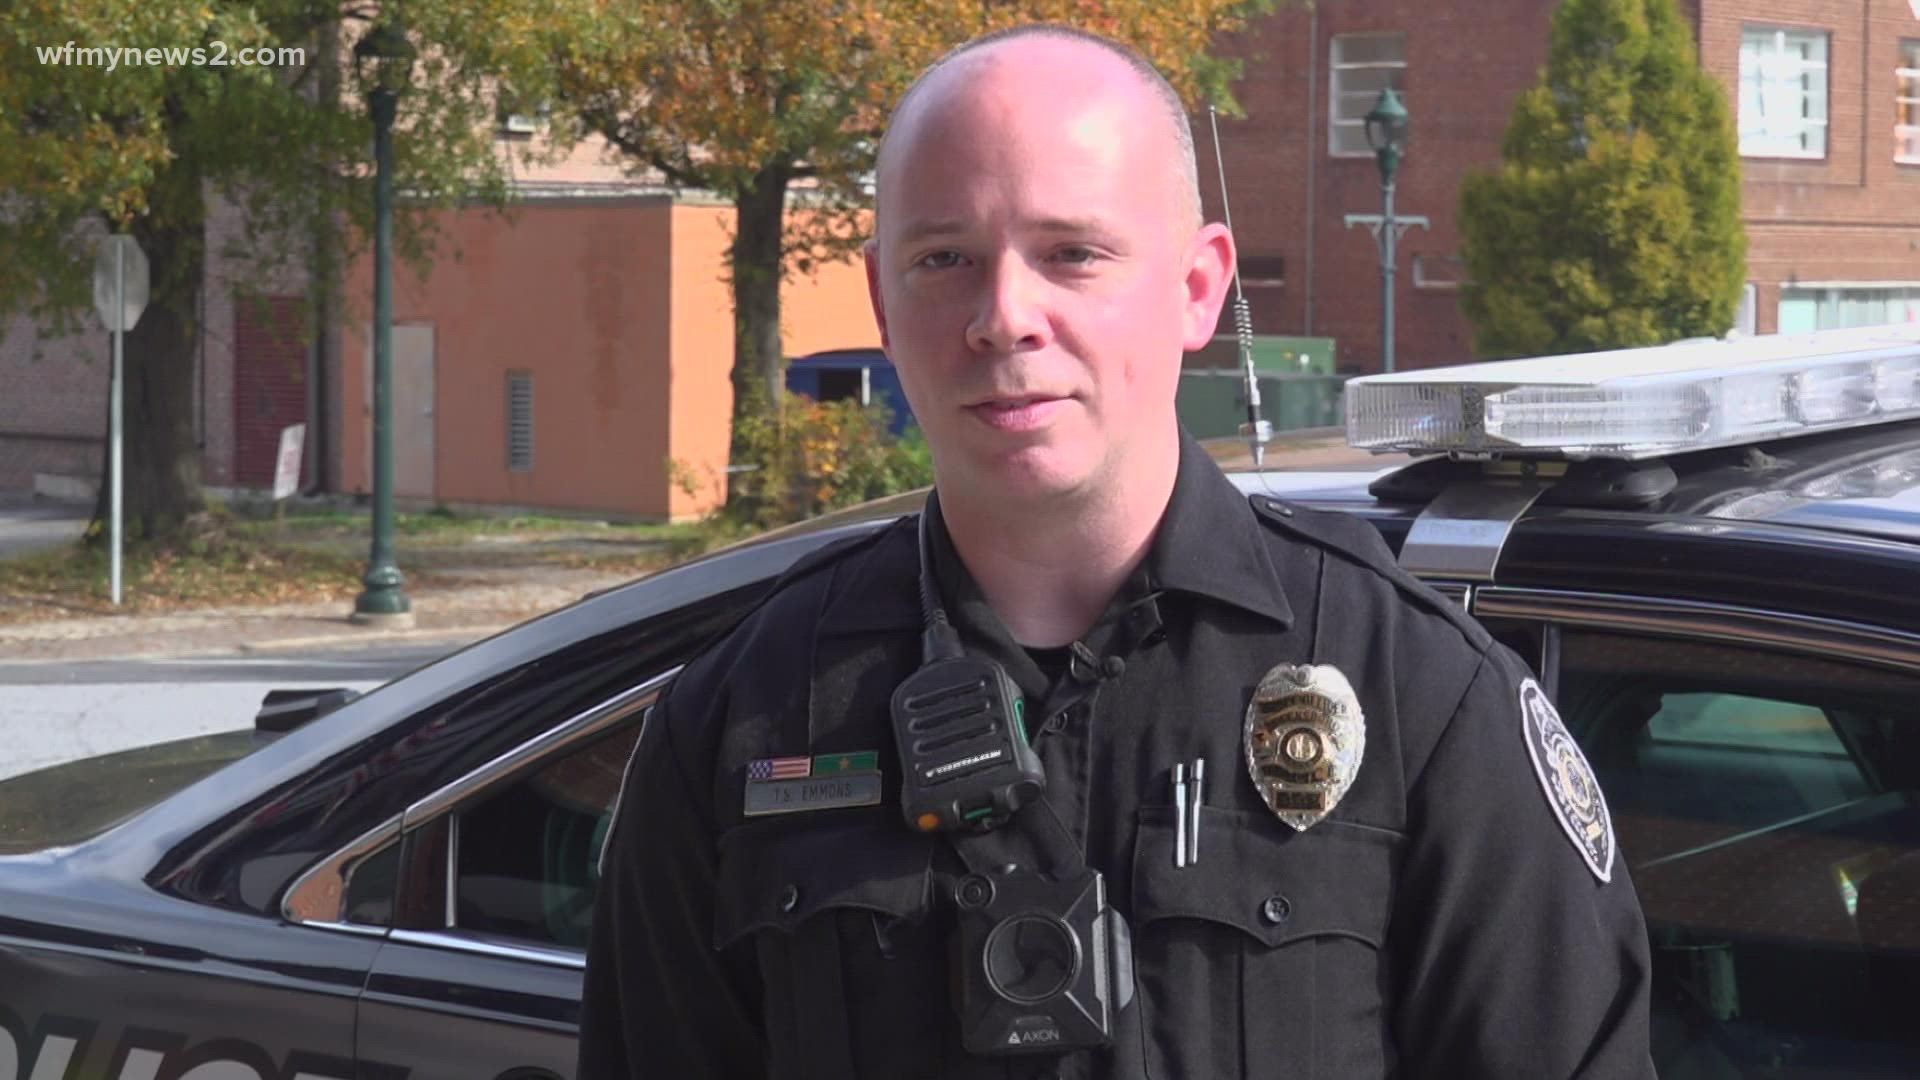 A Greensboro police officer is a hero after saving a man's life while on I-40.